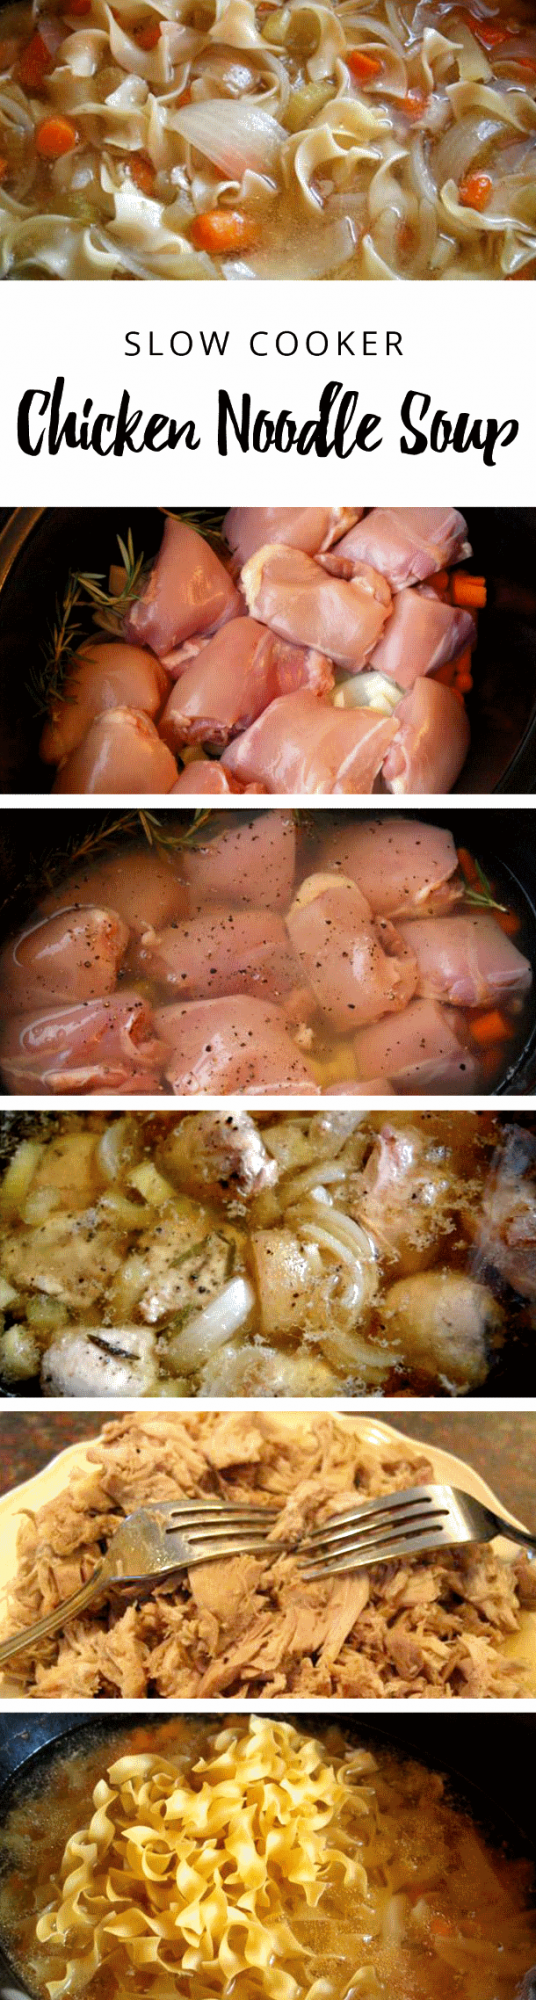 Chicken soup is good for the soul but this recipe is also good for your time management–it cooks in the crockpot while you're at work, making this slow cooker recipe a weeknight dinner winner! | YummyMummyClub.ca